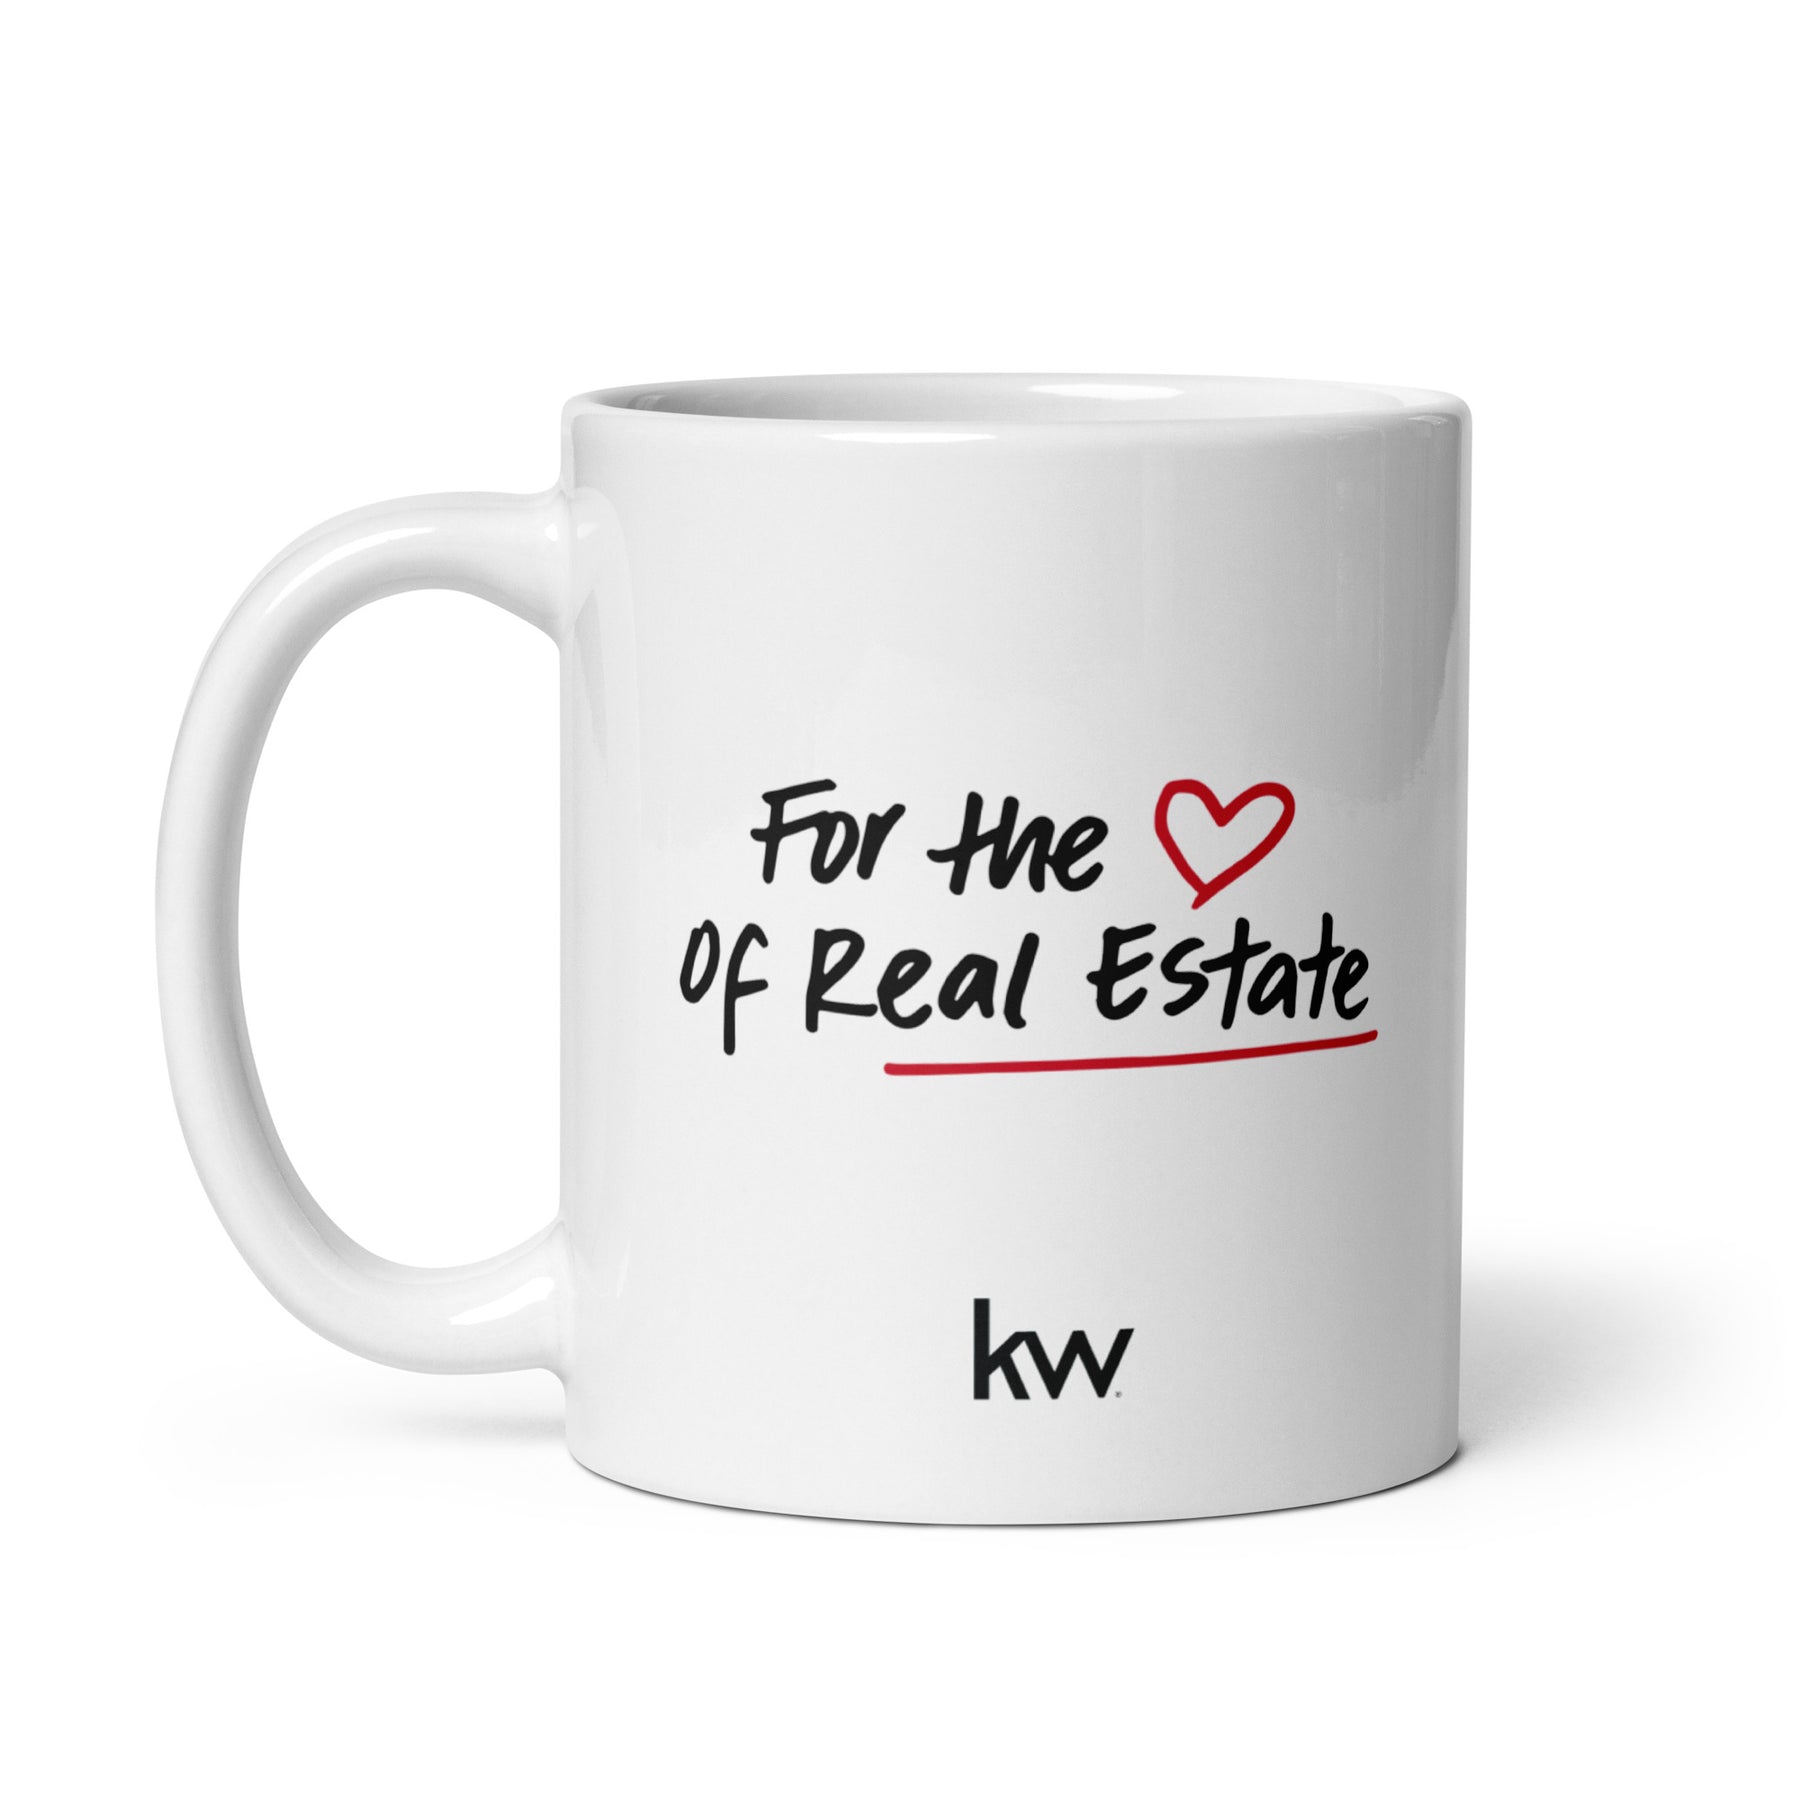 Mug - For the Love of Real Estate